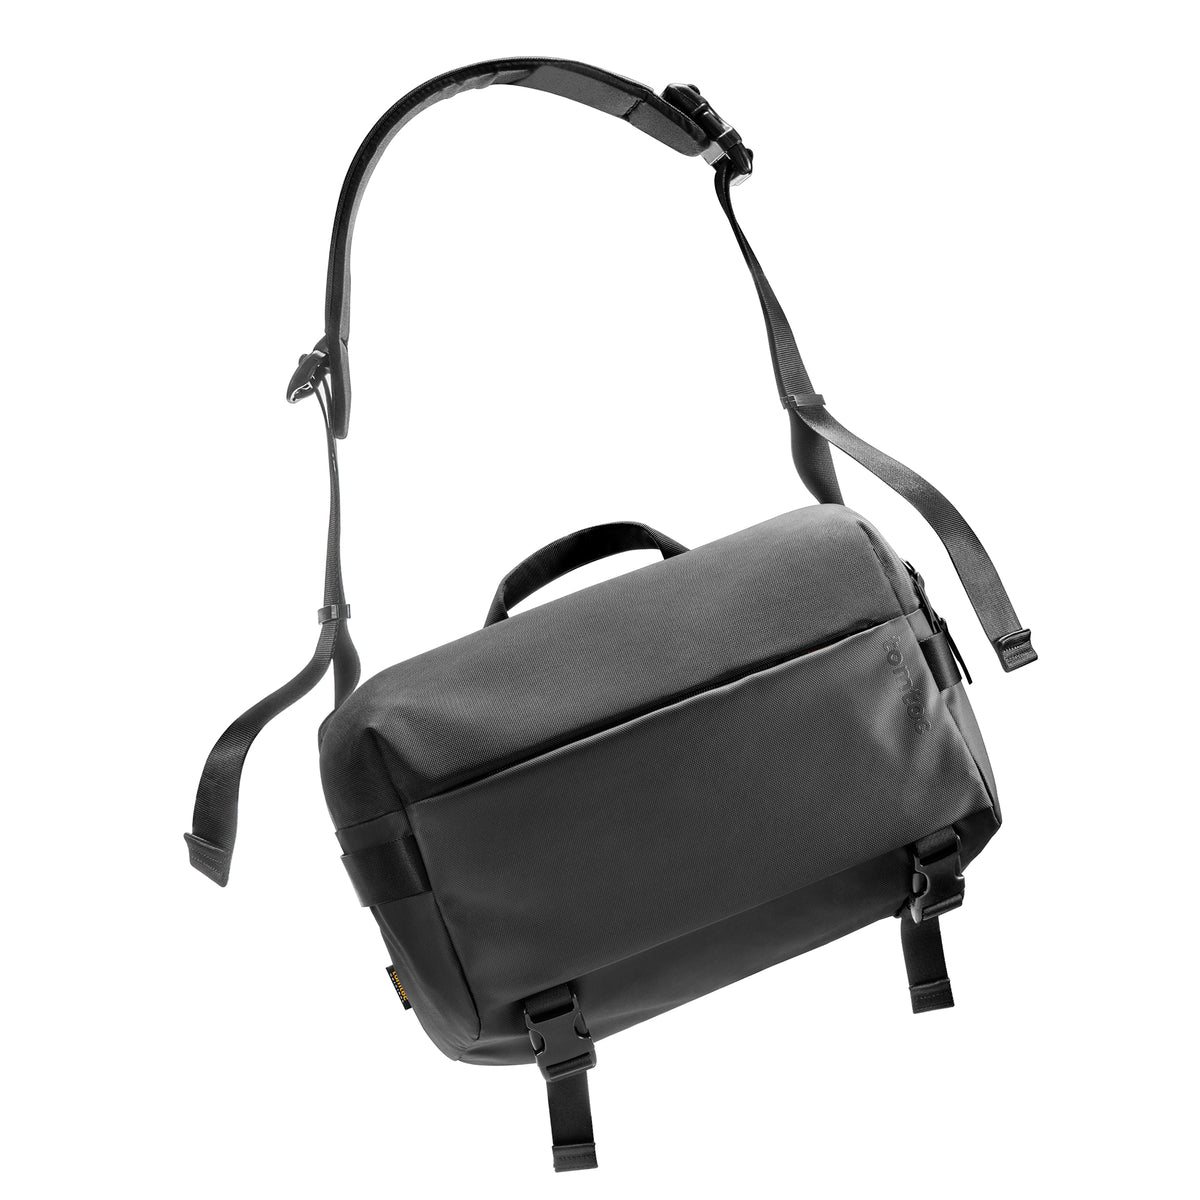 tomtoc 14 Inch Compact EDC Laptop Sling Bag - Black